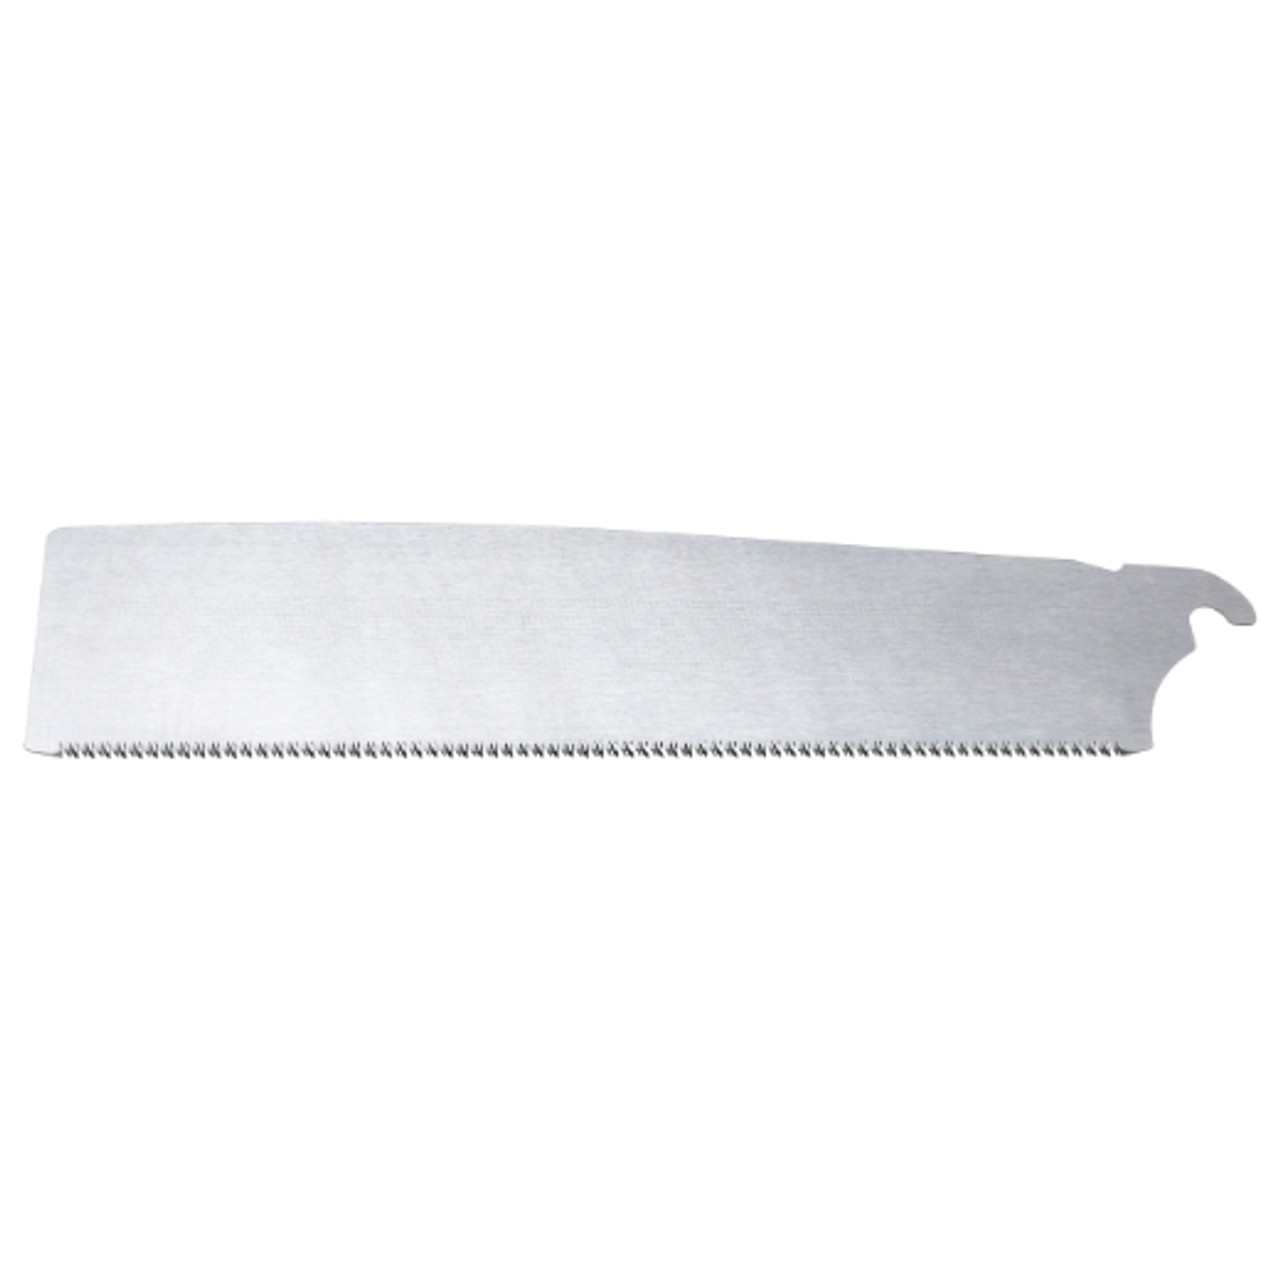 P072093-265 PICARD precision cross-cut replacement saw blade